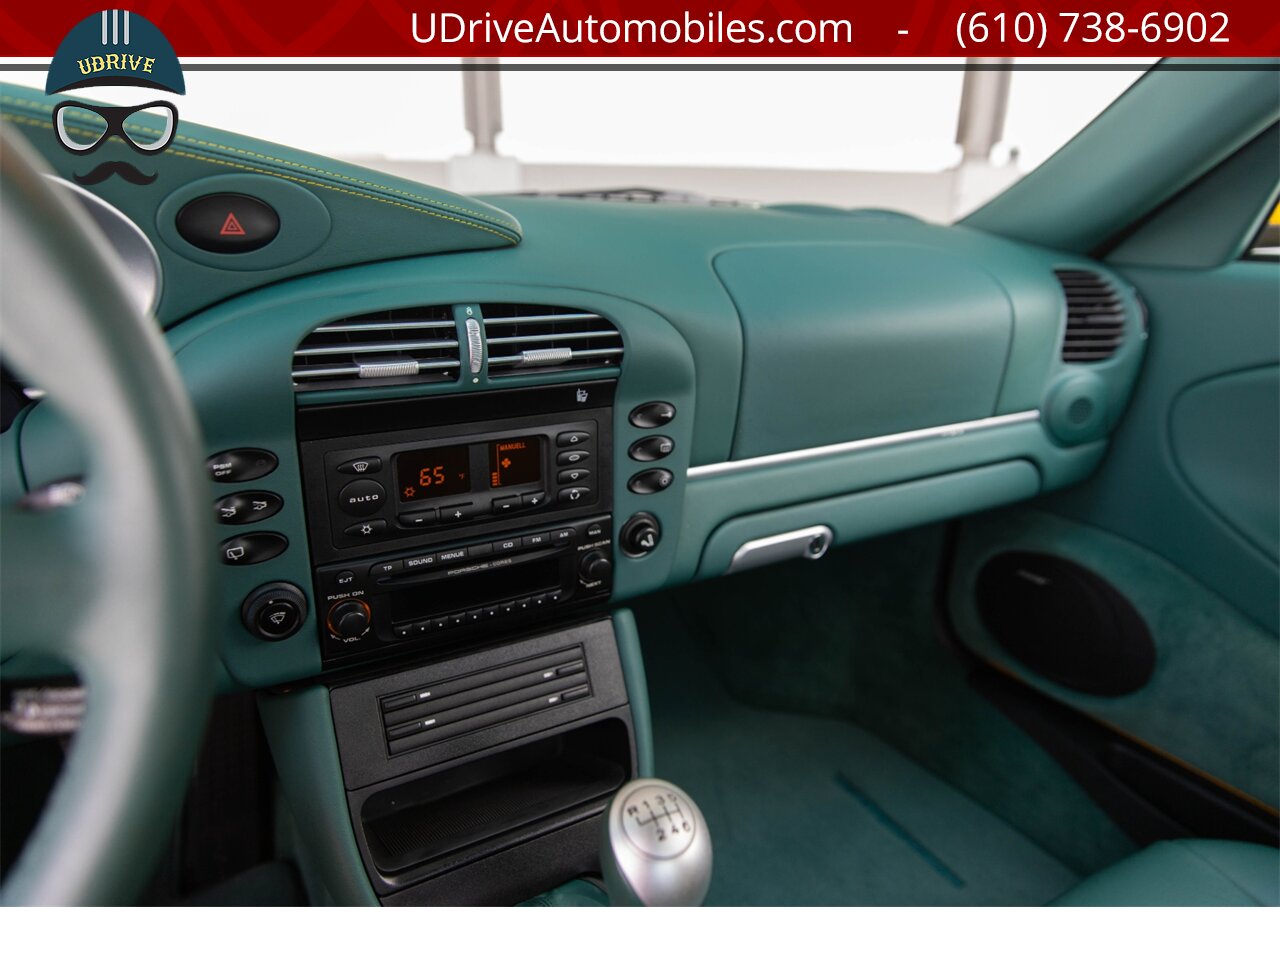 2003 Porsche 911 996 Turbo X50 6Sp Nephrite Green Lthr 9k Miles  Deviating Yellow Stitching Collector Grade BACK AGAIN - Photo 33 - West Chester, PA 19382